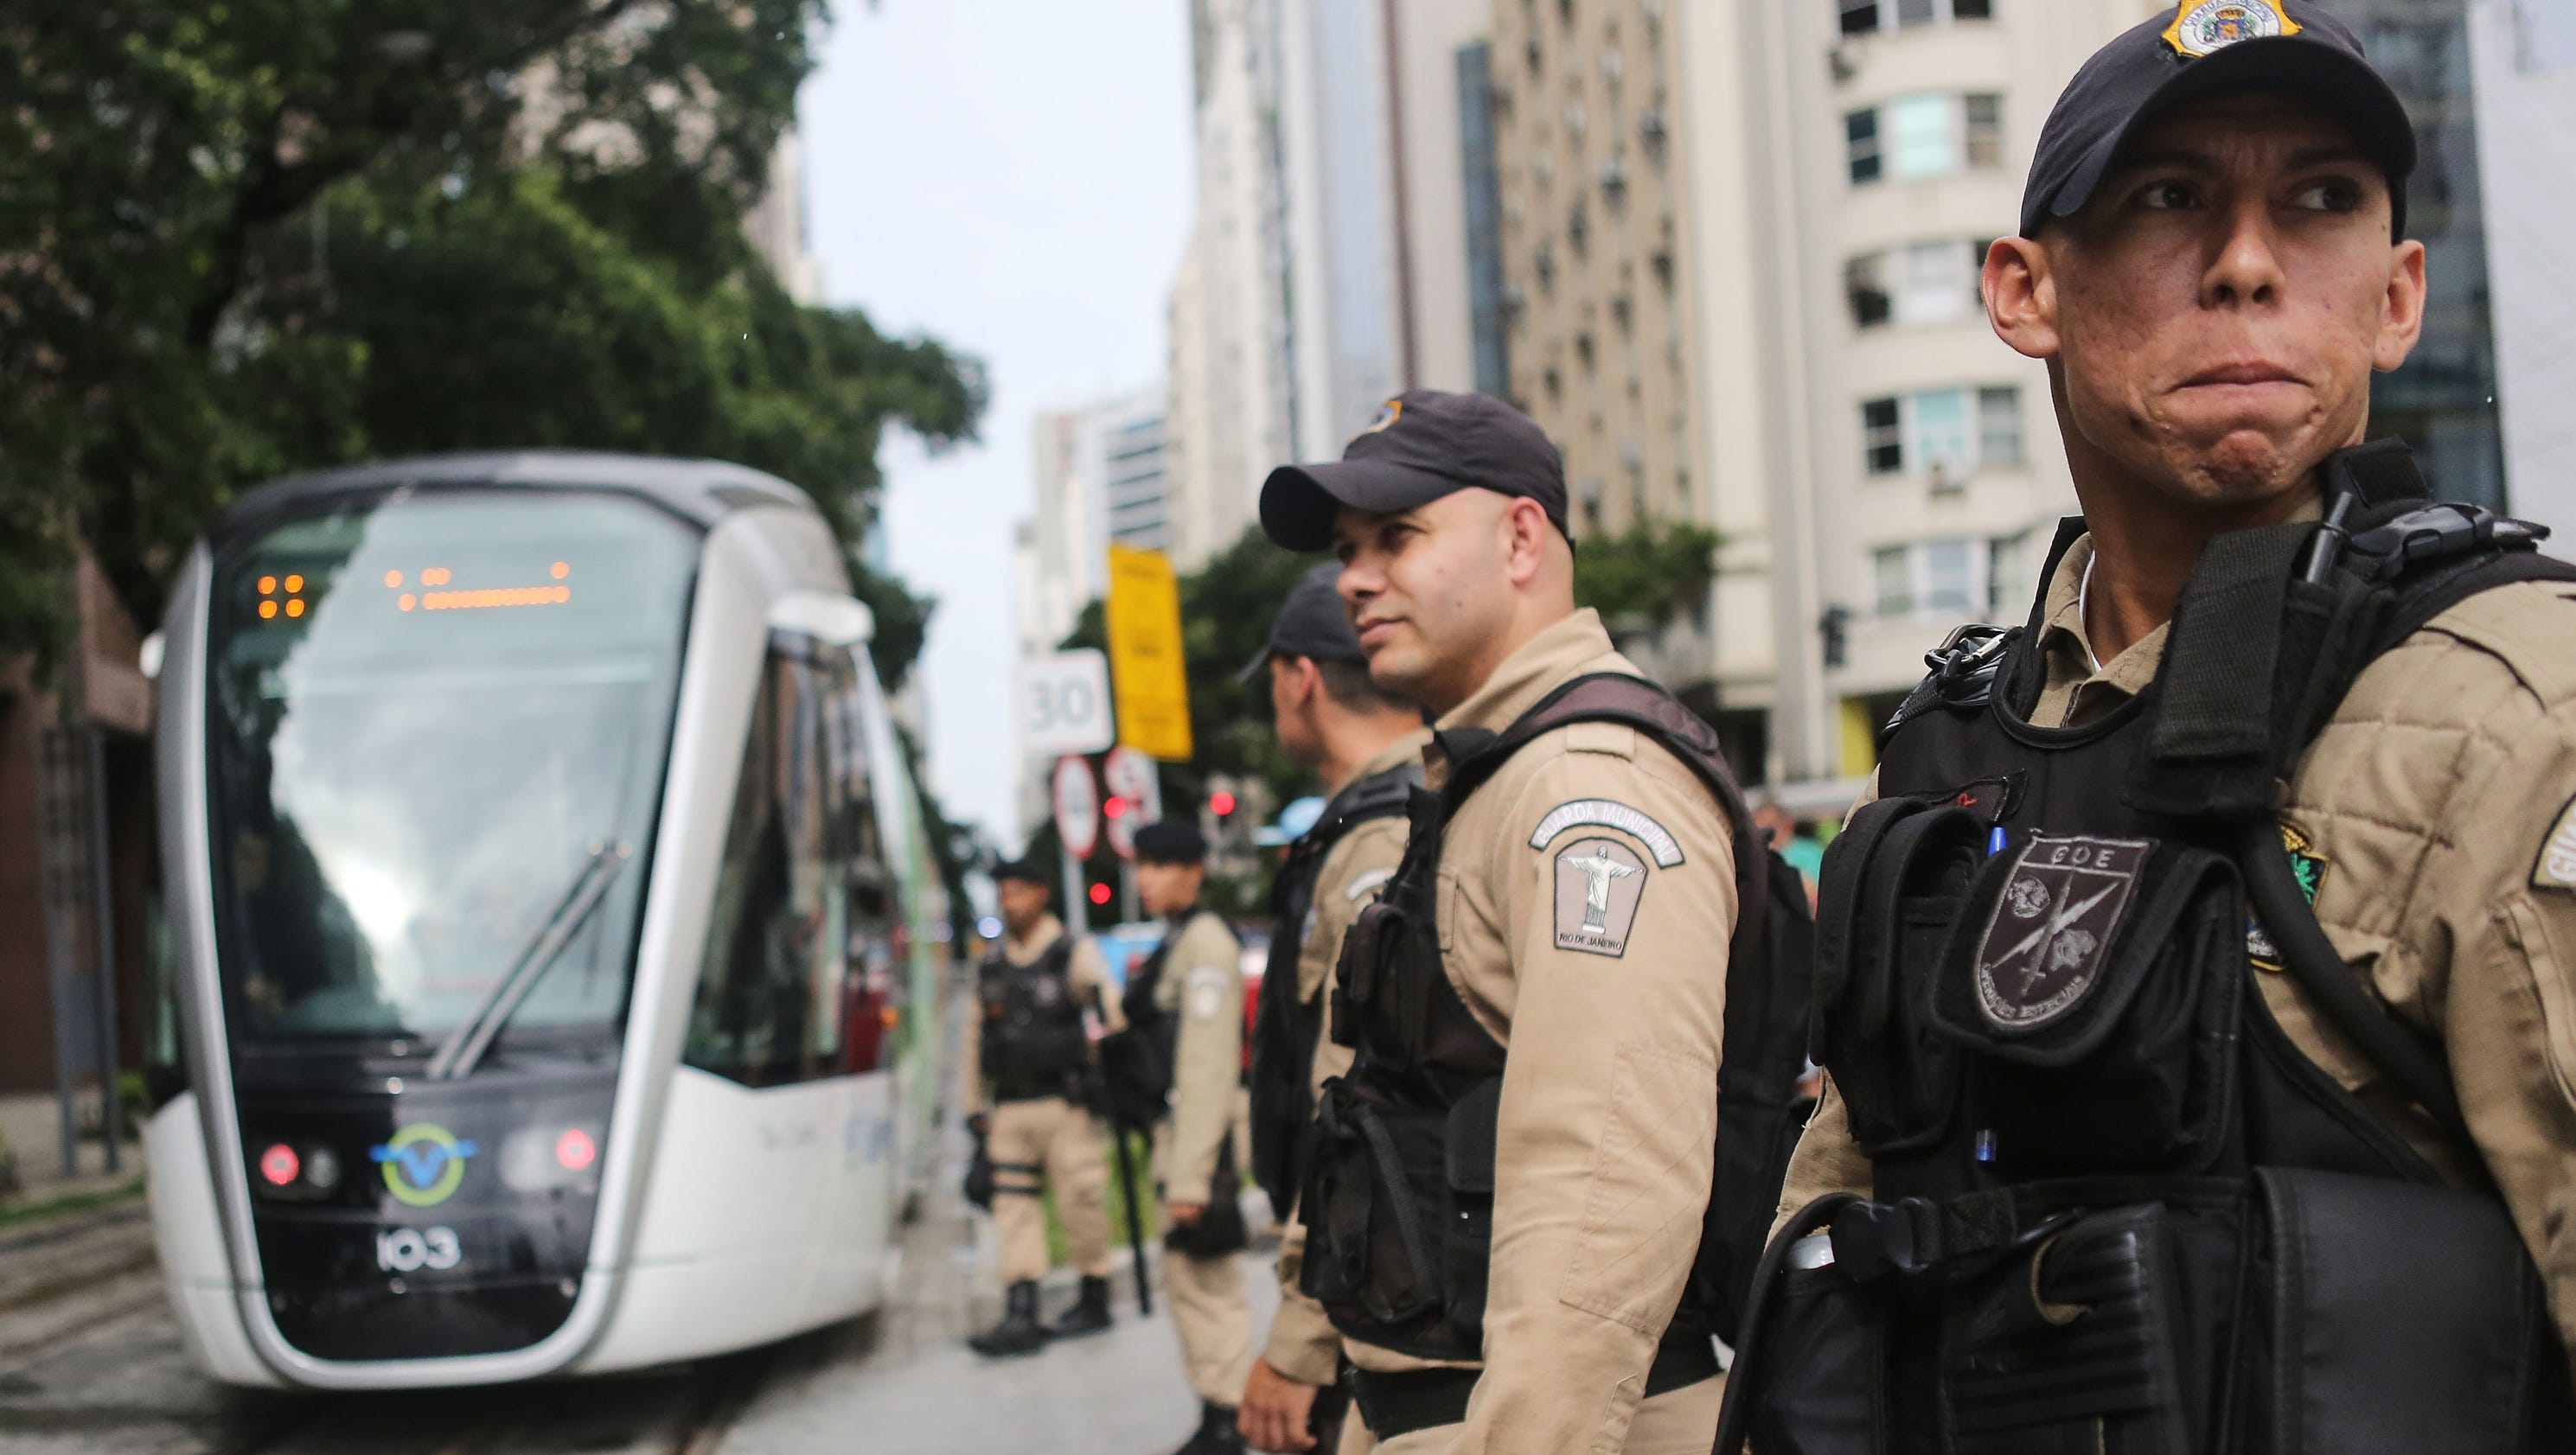 Rio violence leaves little confidence in public security